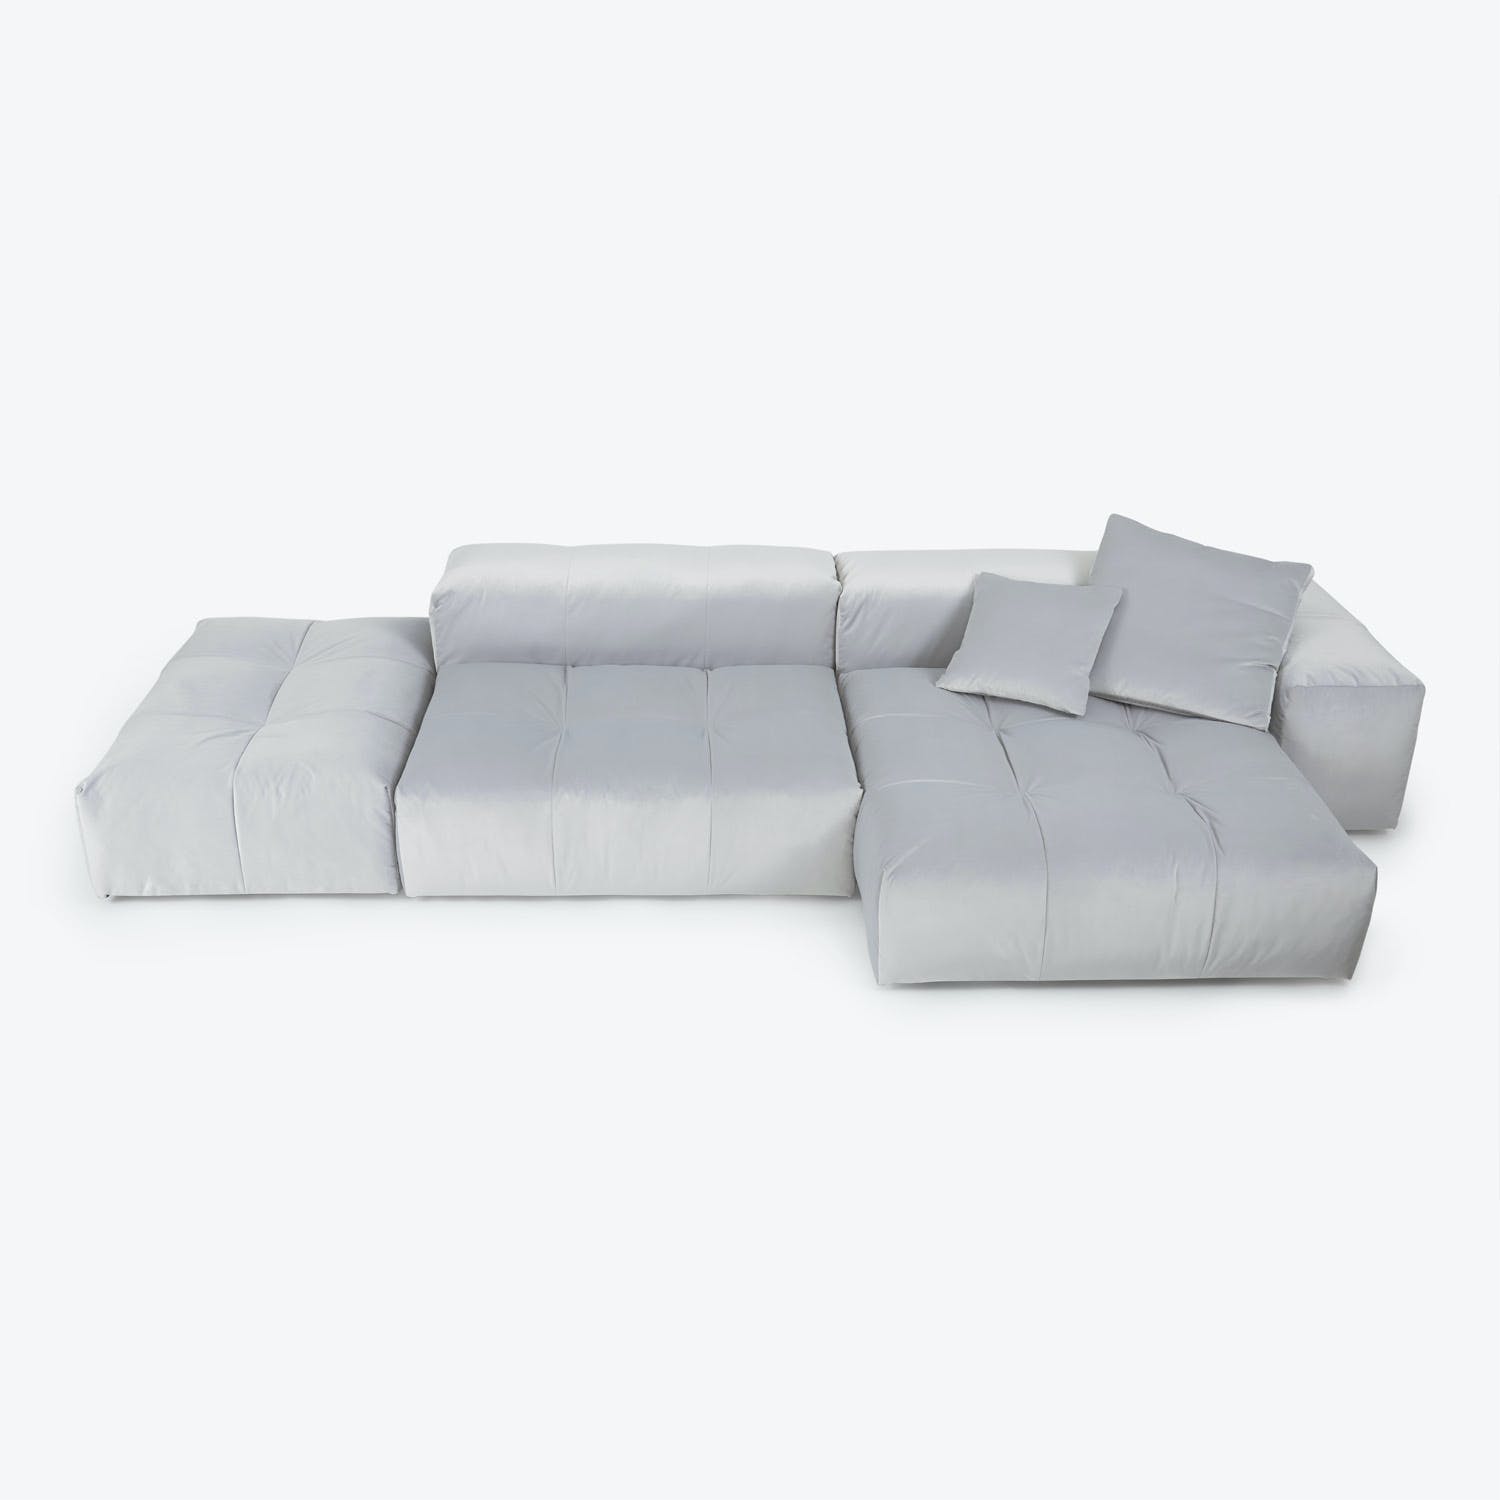 Contemporary modular sectional sofa with versatile design and minimalist aesthetic.